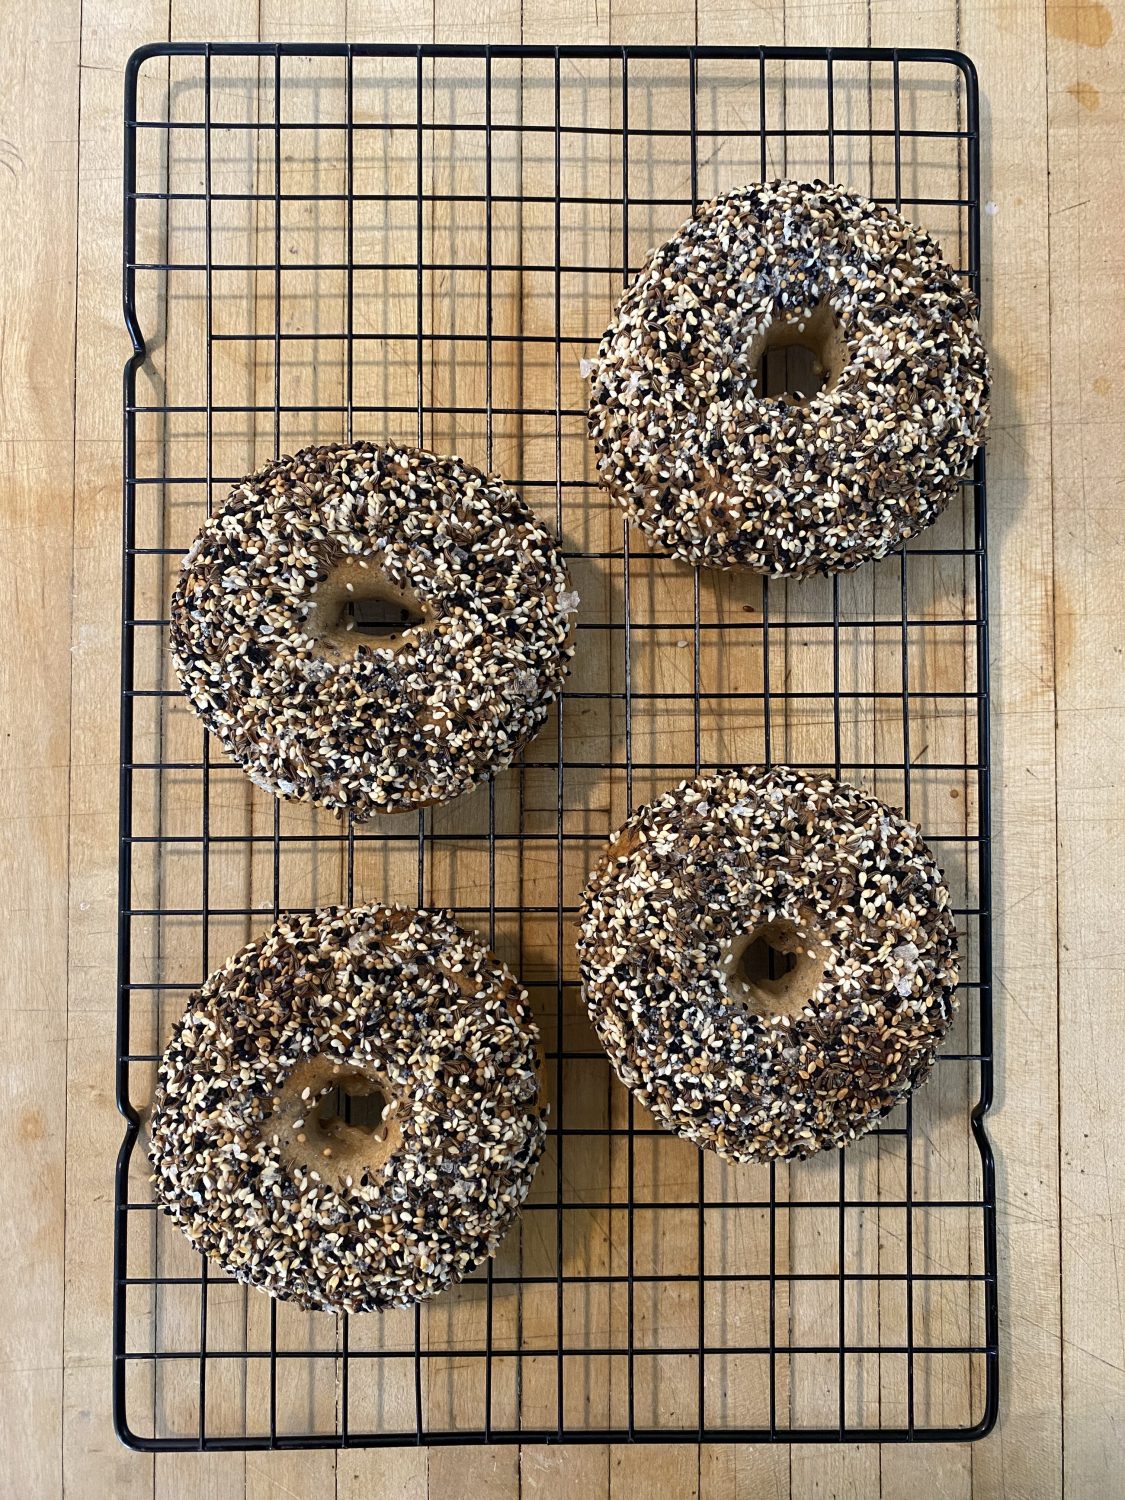 Stone-milled flour means Mighty Bread and Bagels!